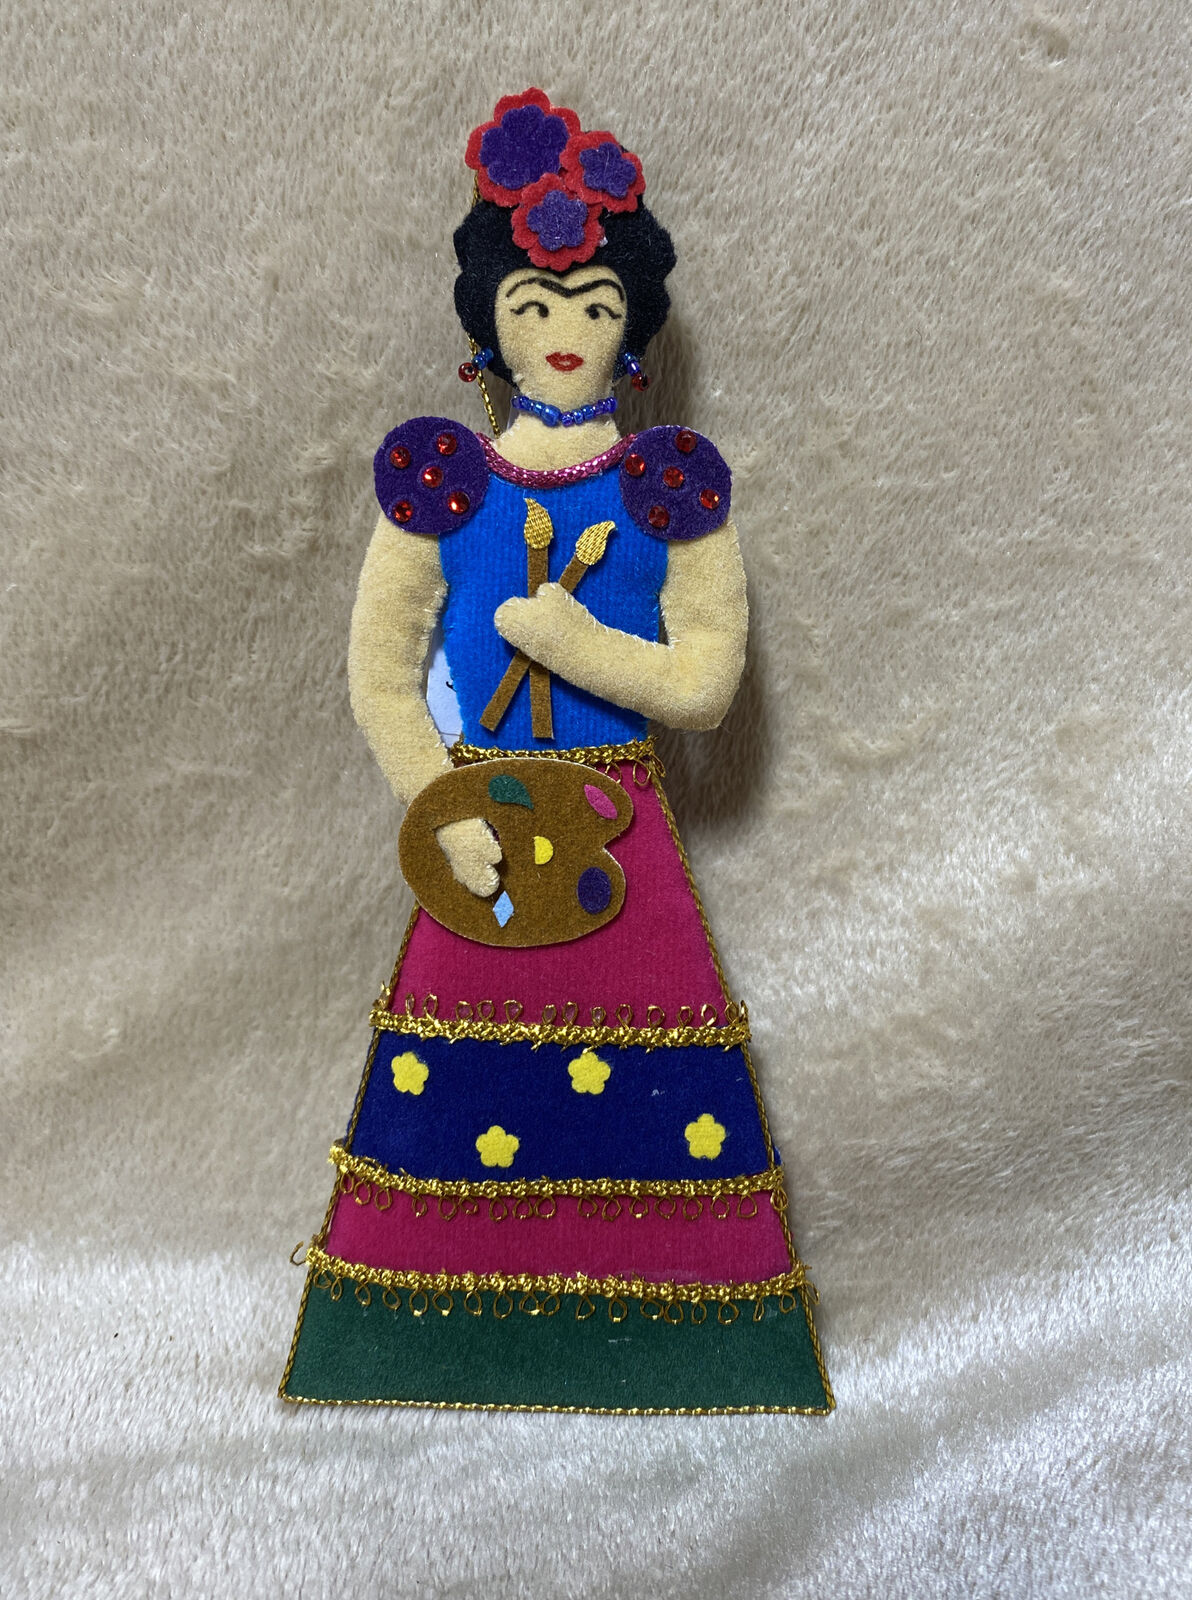 St. Nicolas Embroidered Frida Kahlo Ornament 6.5 Inches Tall #9225 FK NEW